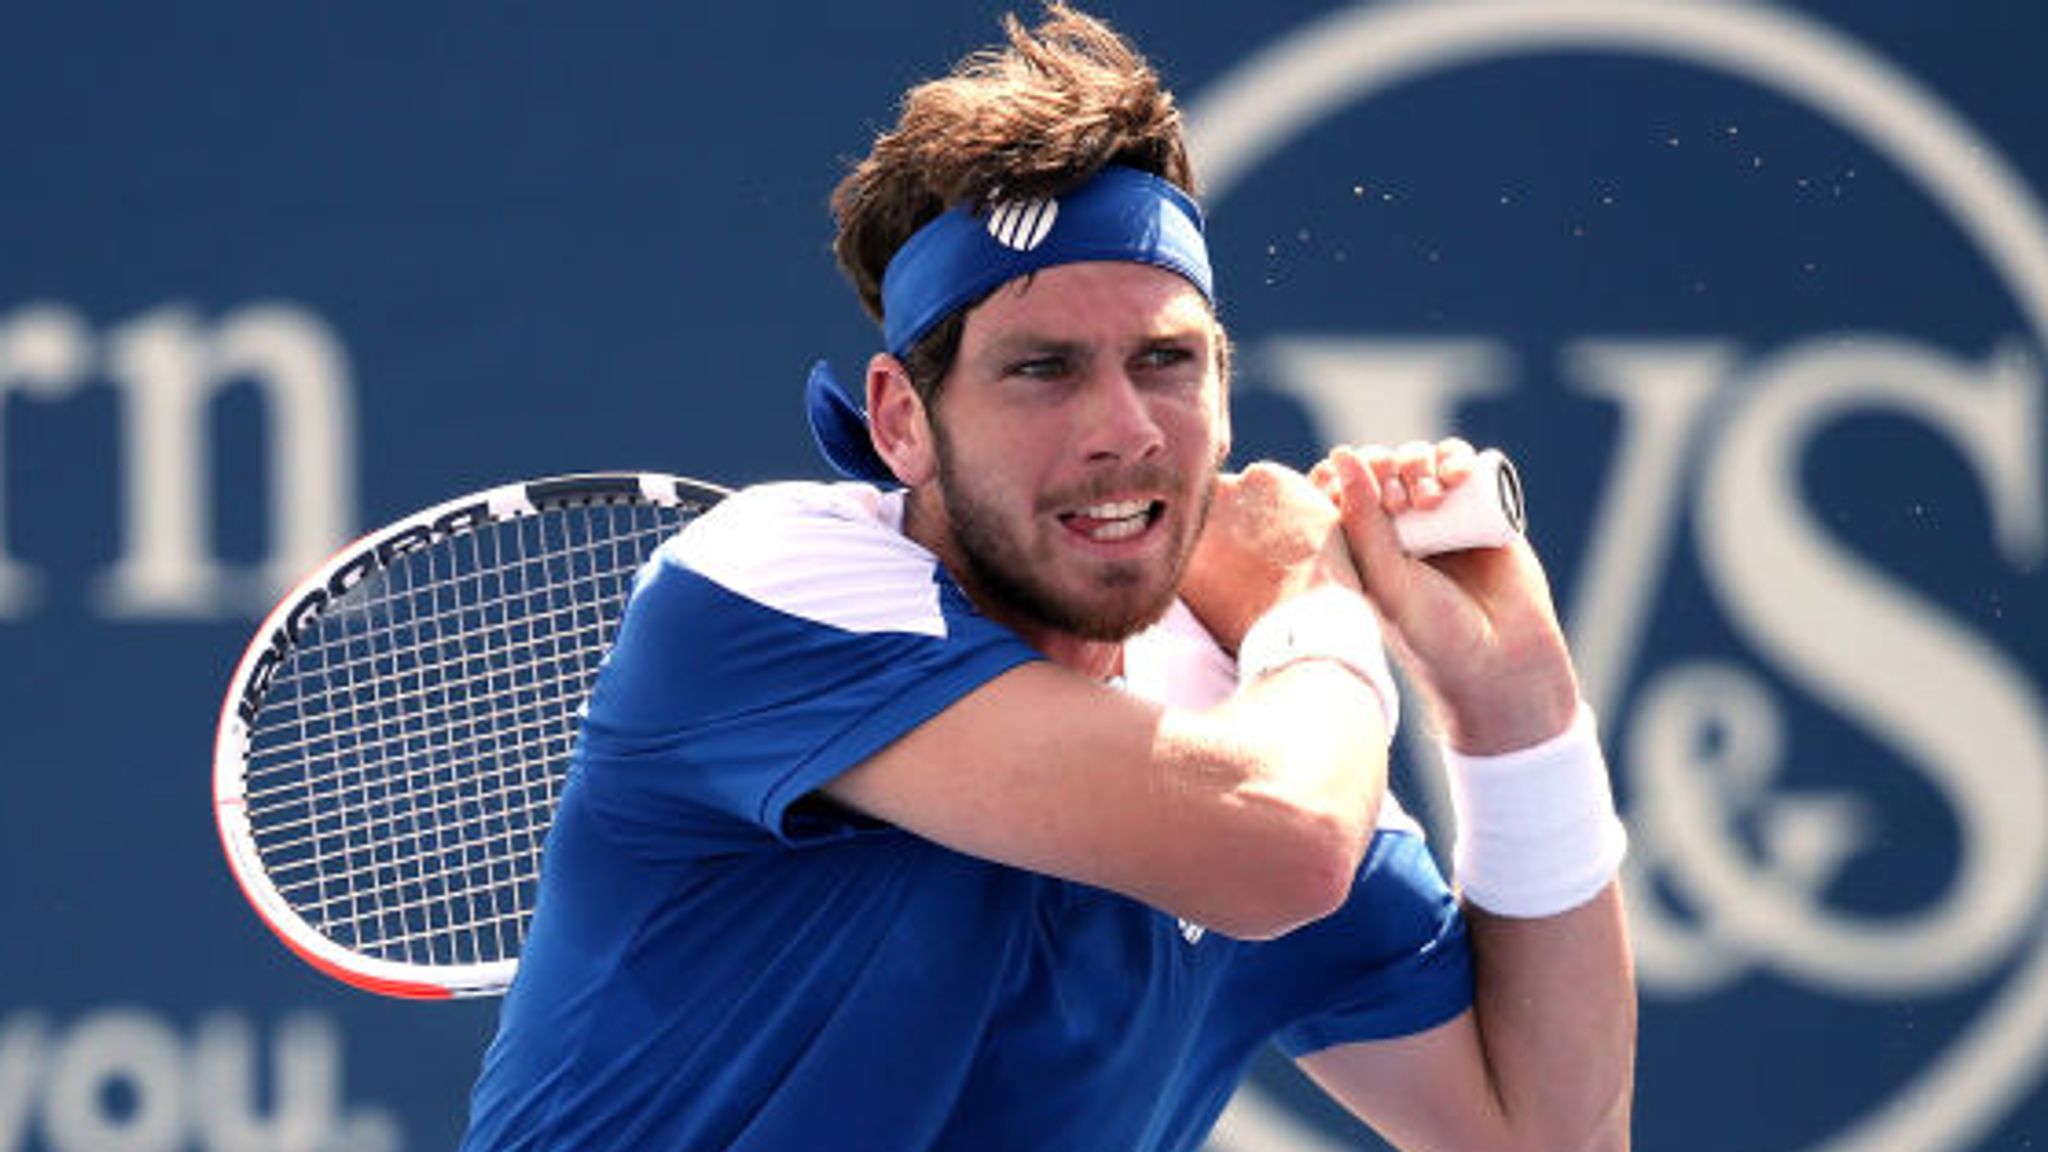 US Open Cameron Norrie believes he is ready to continue strong run Tennis News Sky Sports